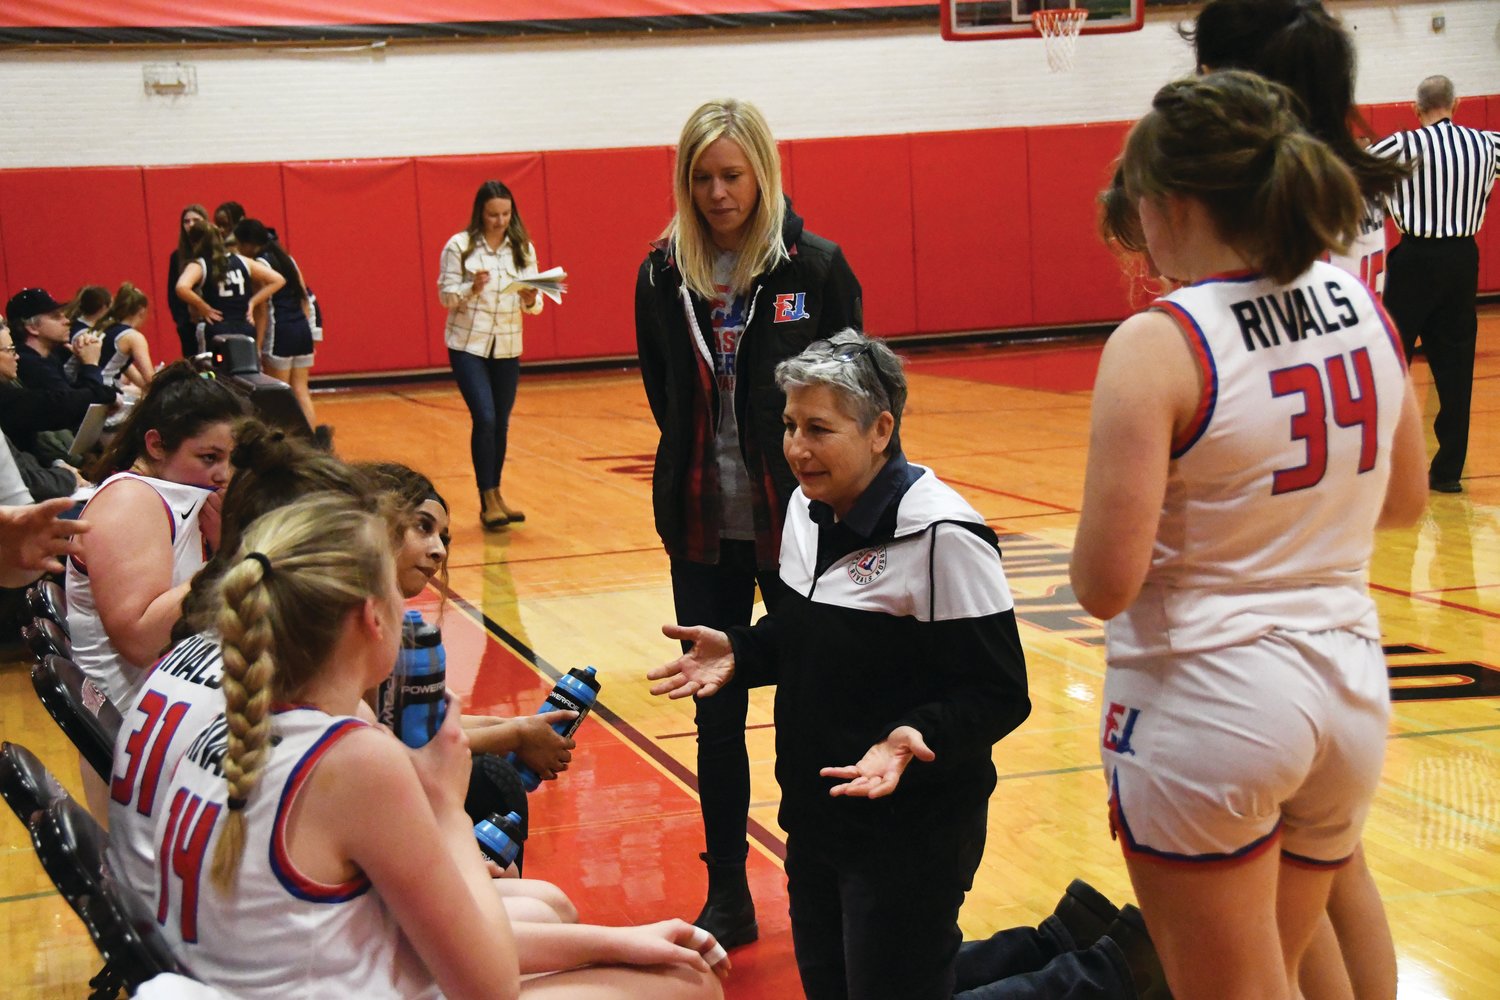 Rivals Head Coach Lorraine Rimson speaks with her girls after calling a timeout late into the game.